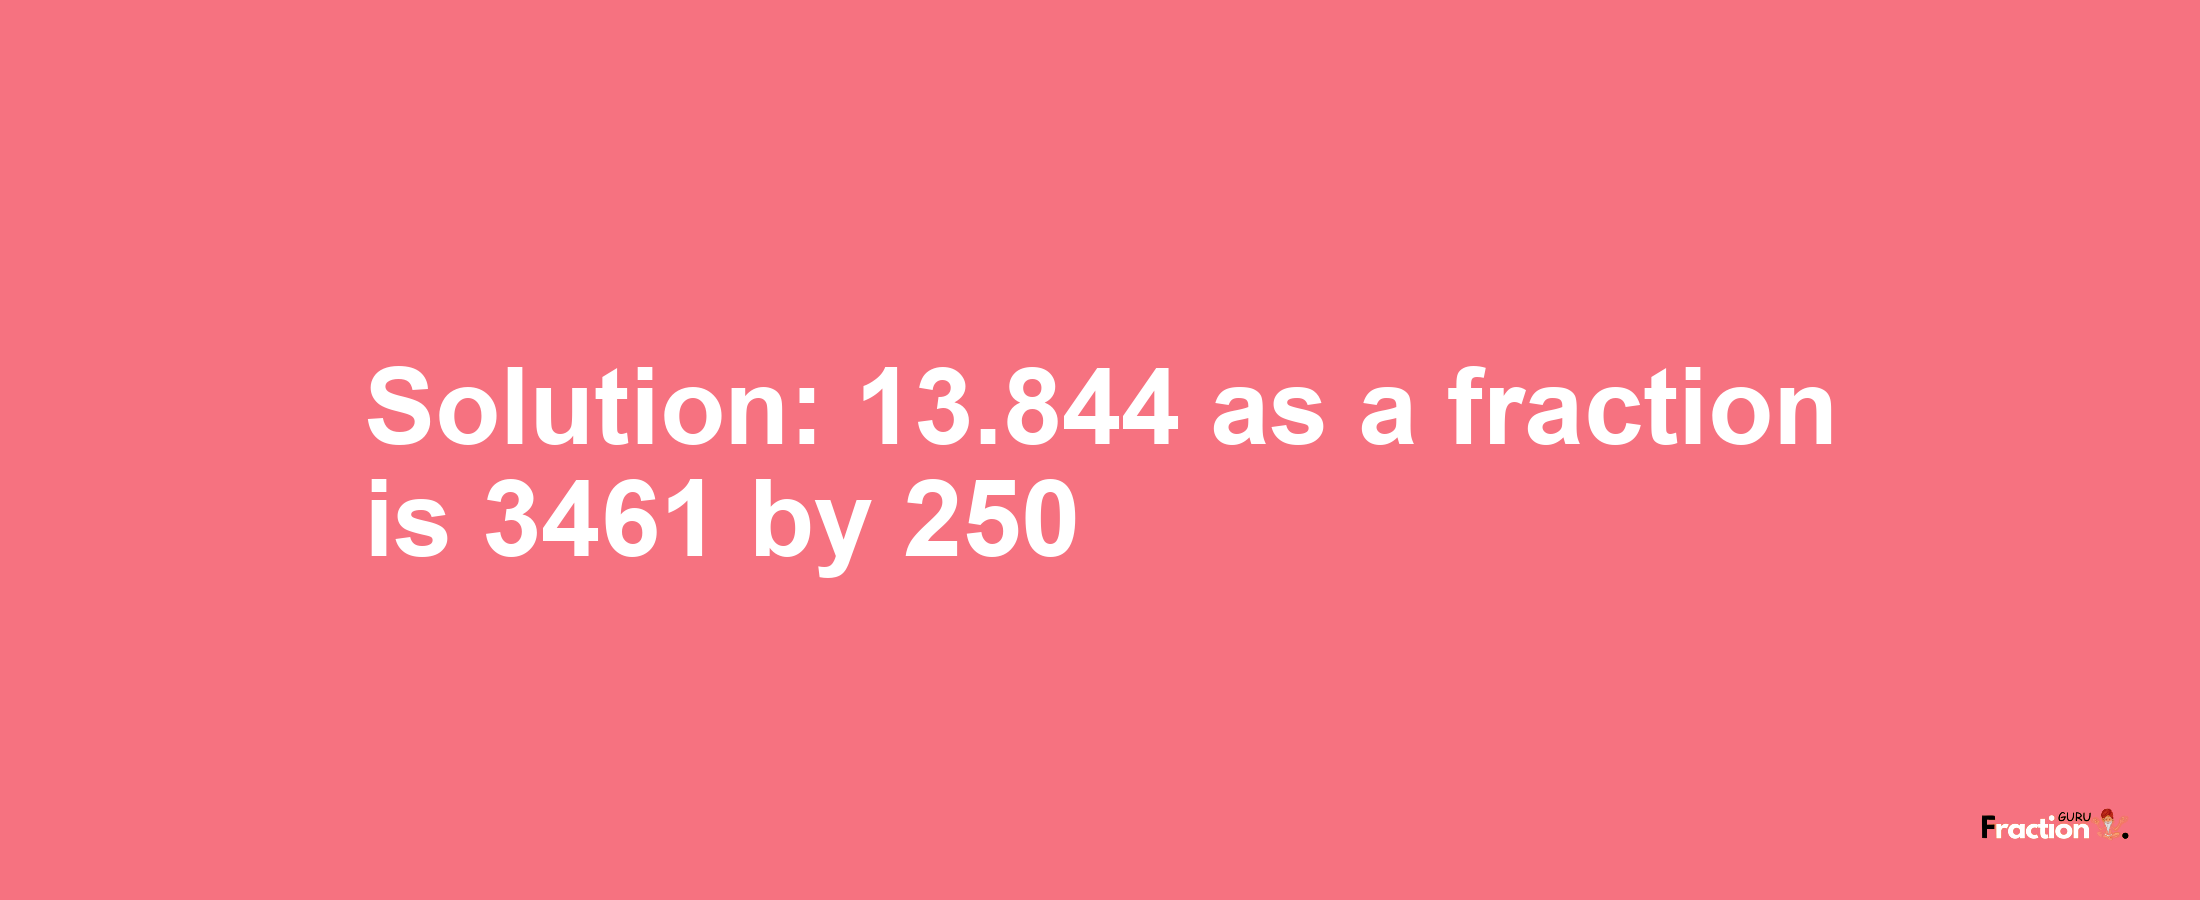 Solution:13.844 as a fraction is 3461/250